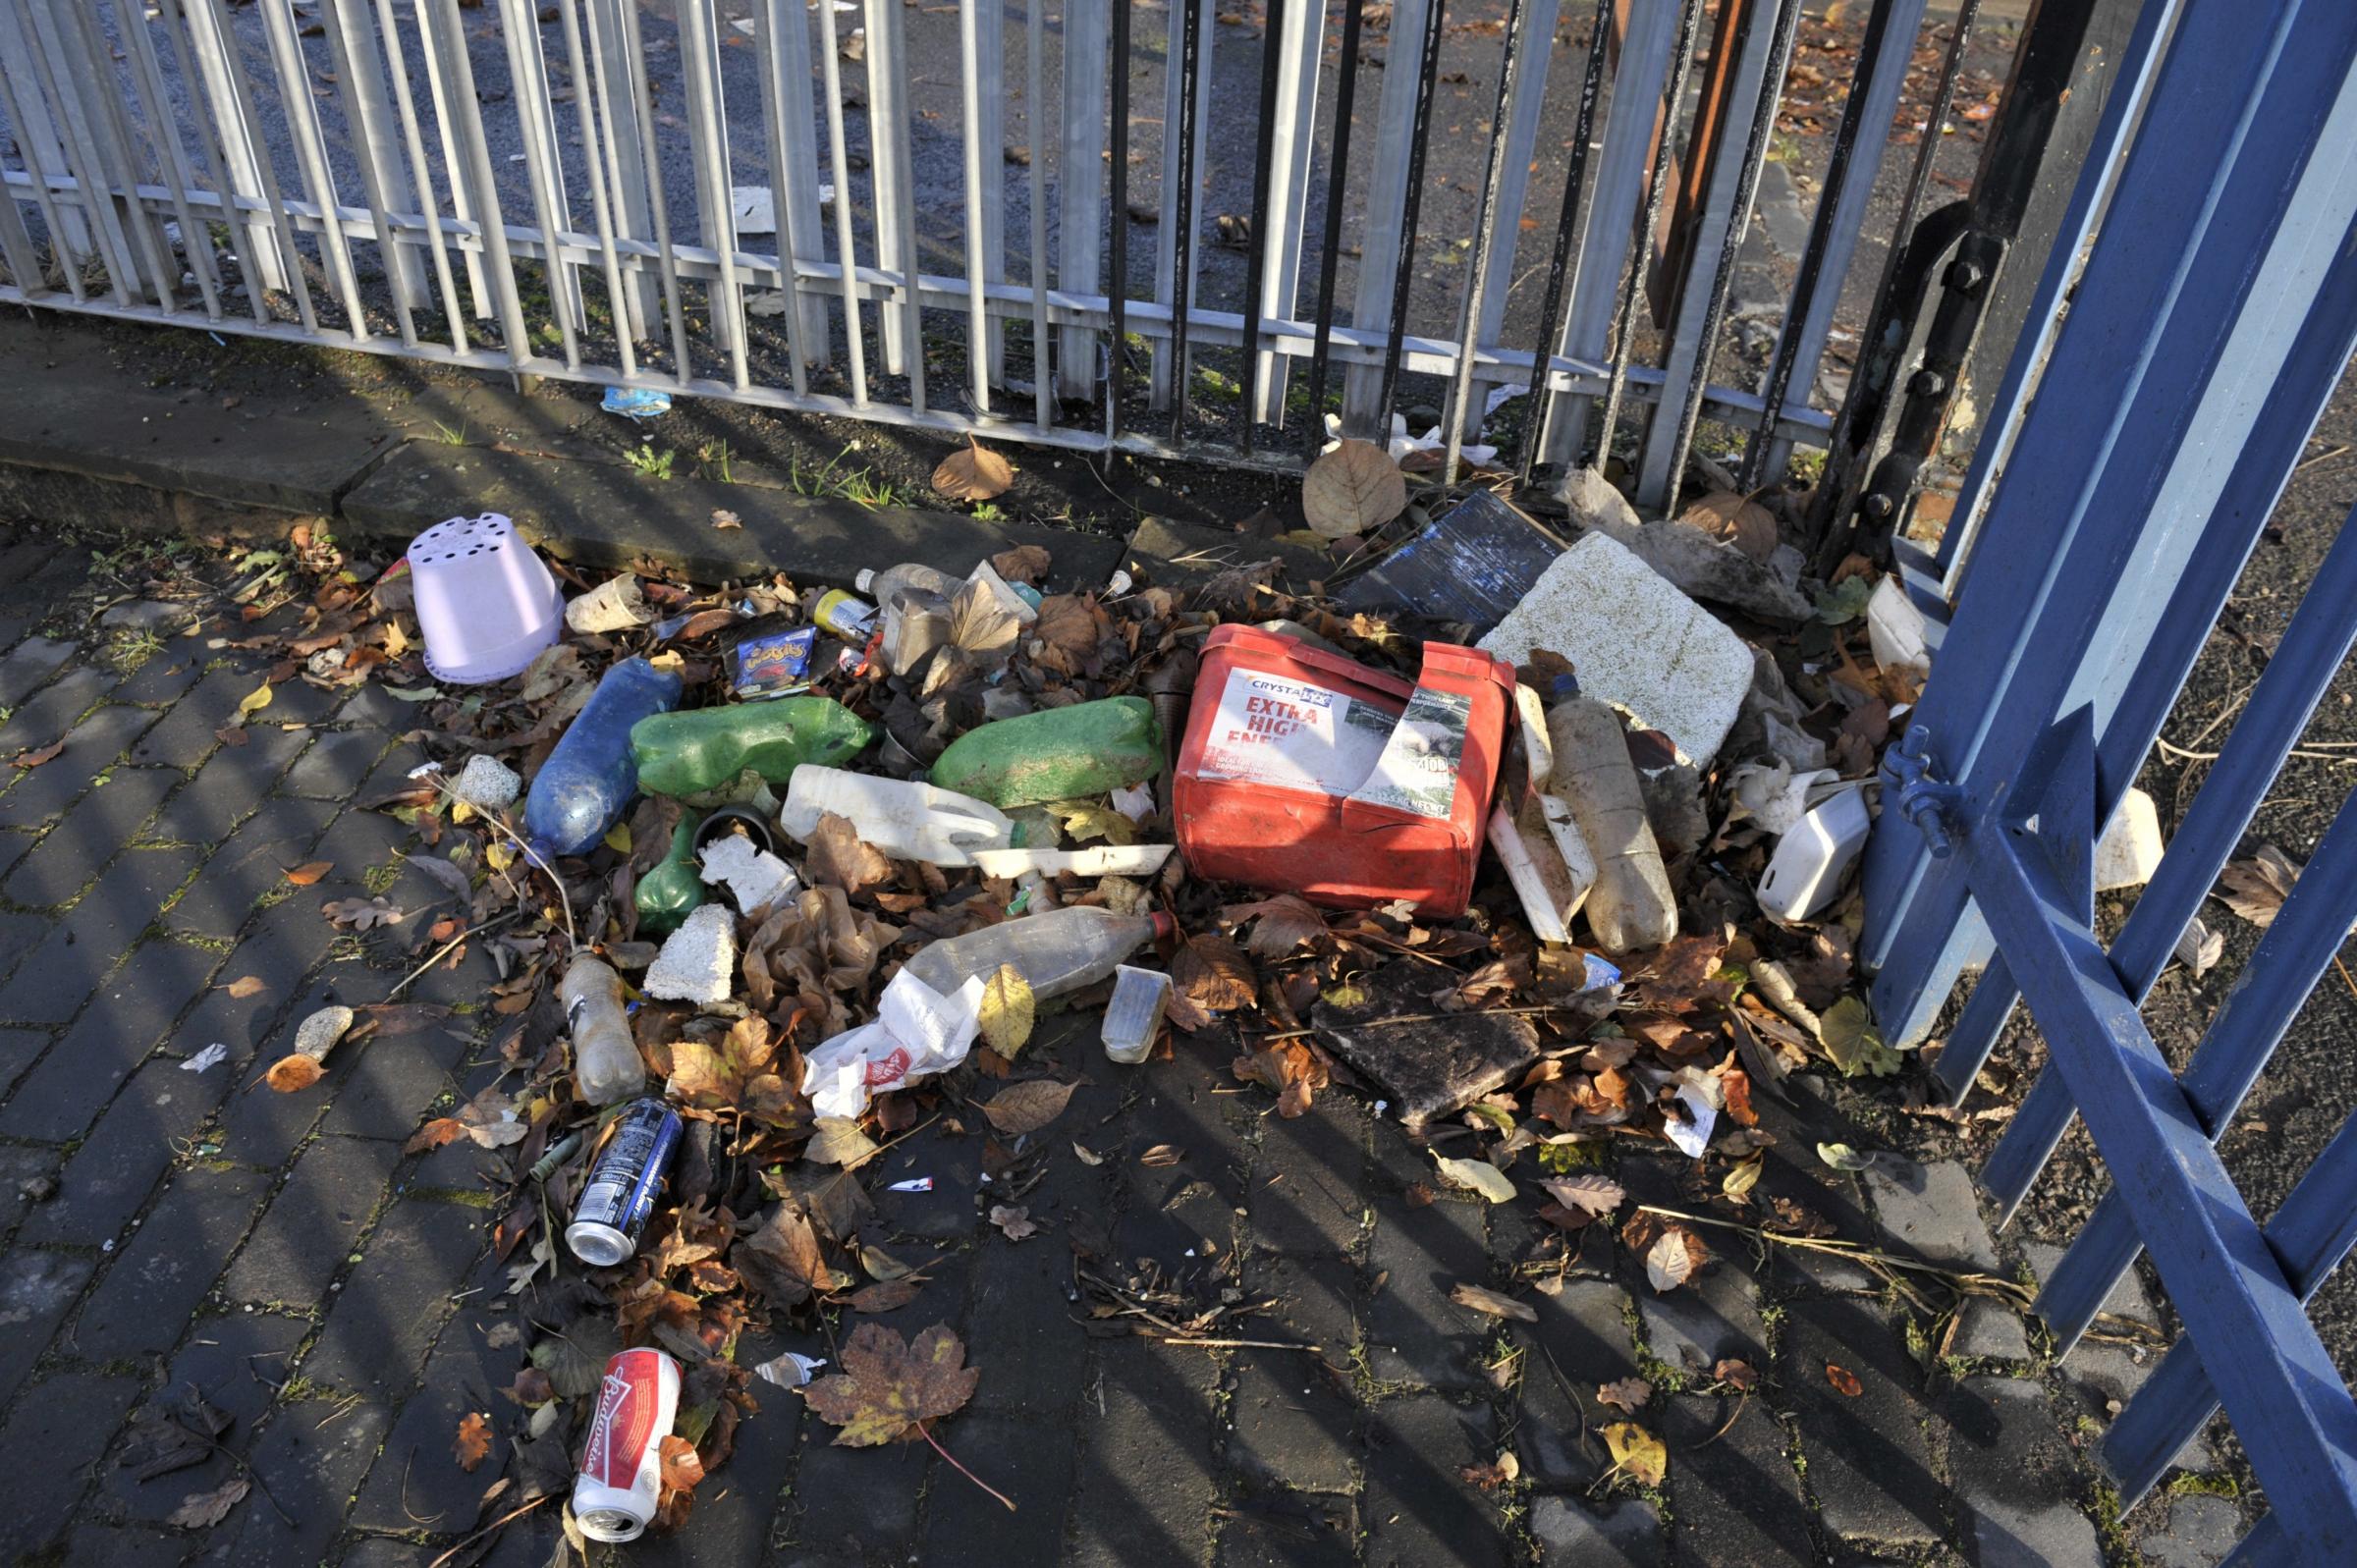 Do we complain too much about litter and not take enough responsibility ourselves?